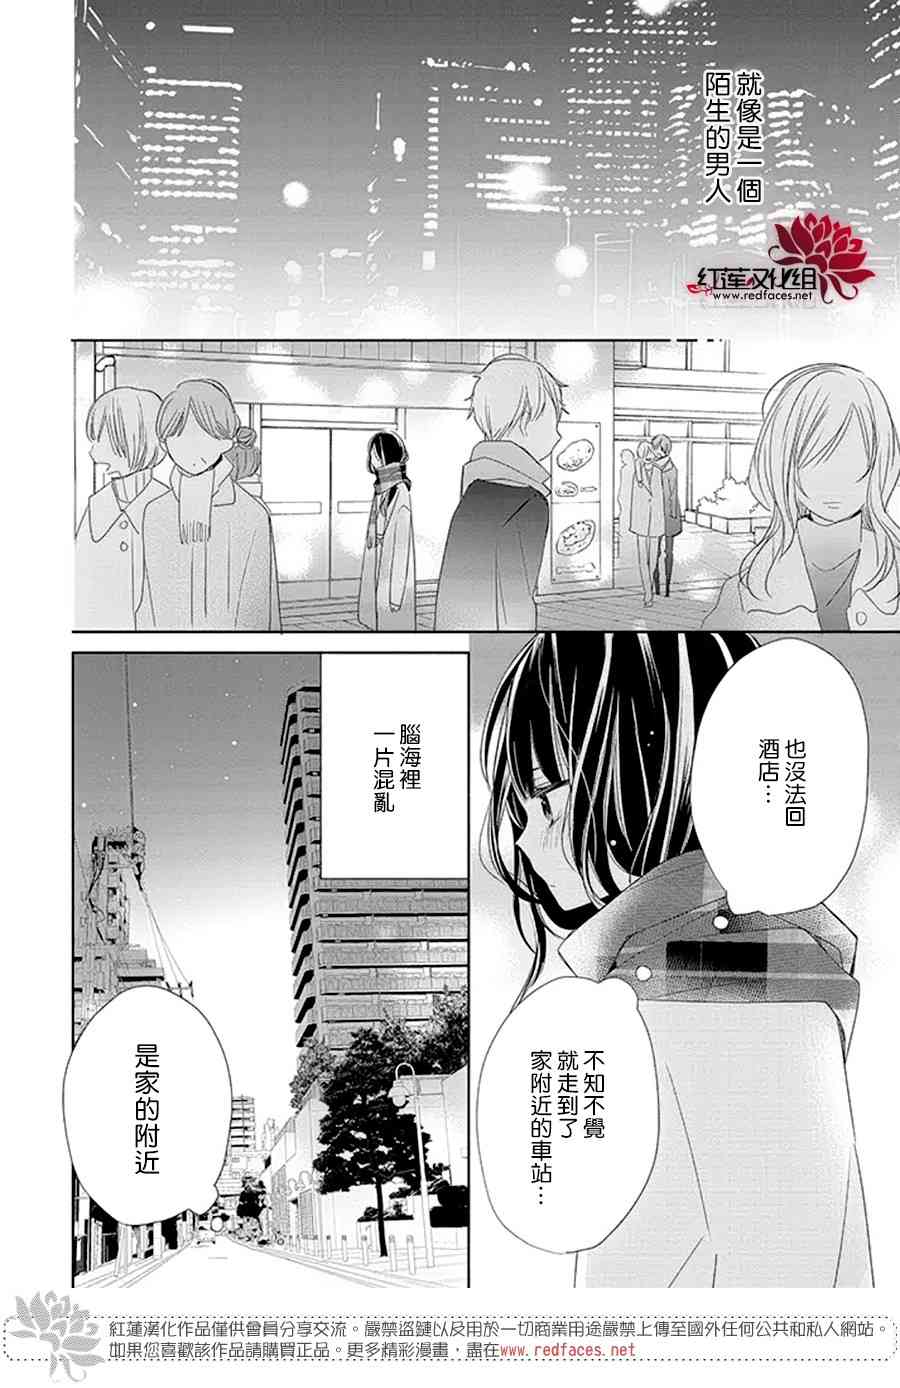 If given a second chance - 19話 - 5